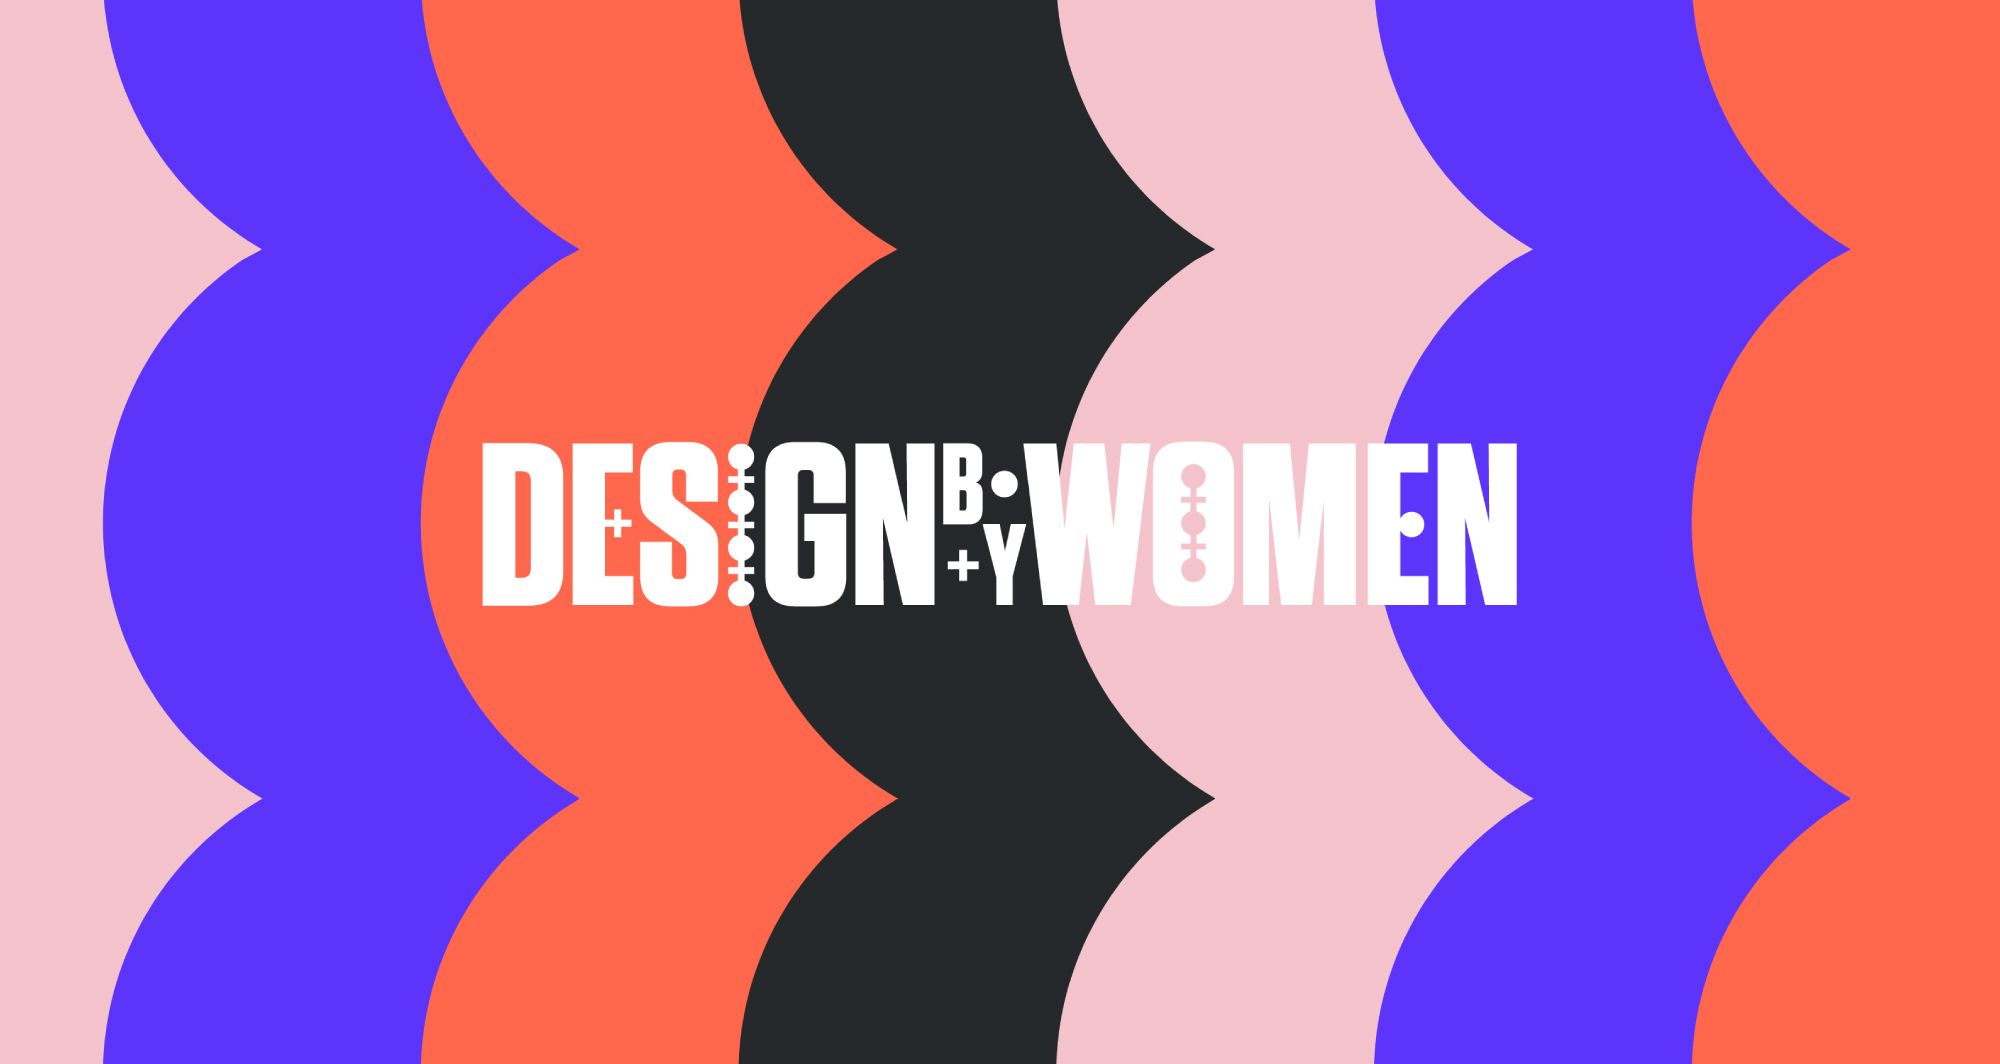 Introducing DesignbyWomen - founded by graphic designer Mary Hemingway to showcase, empower and celebrate women and under-represented creatives